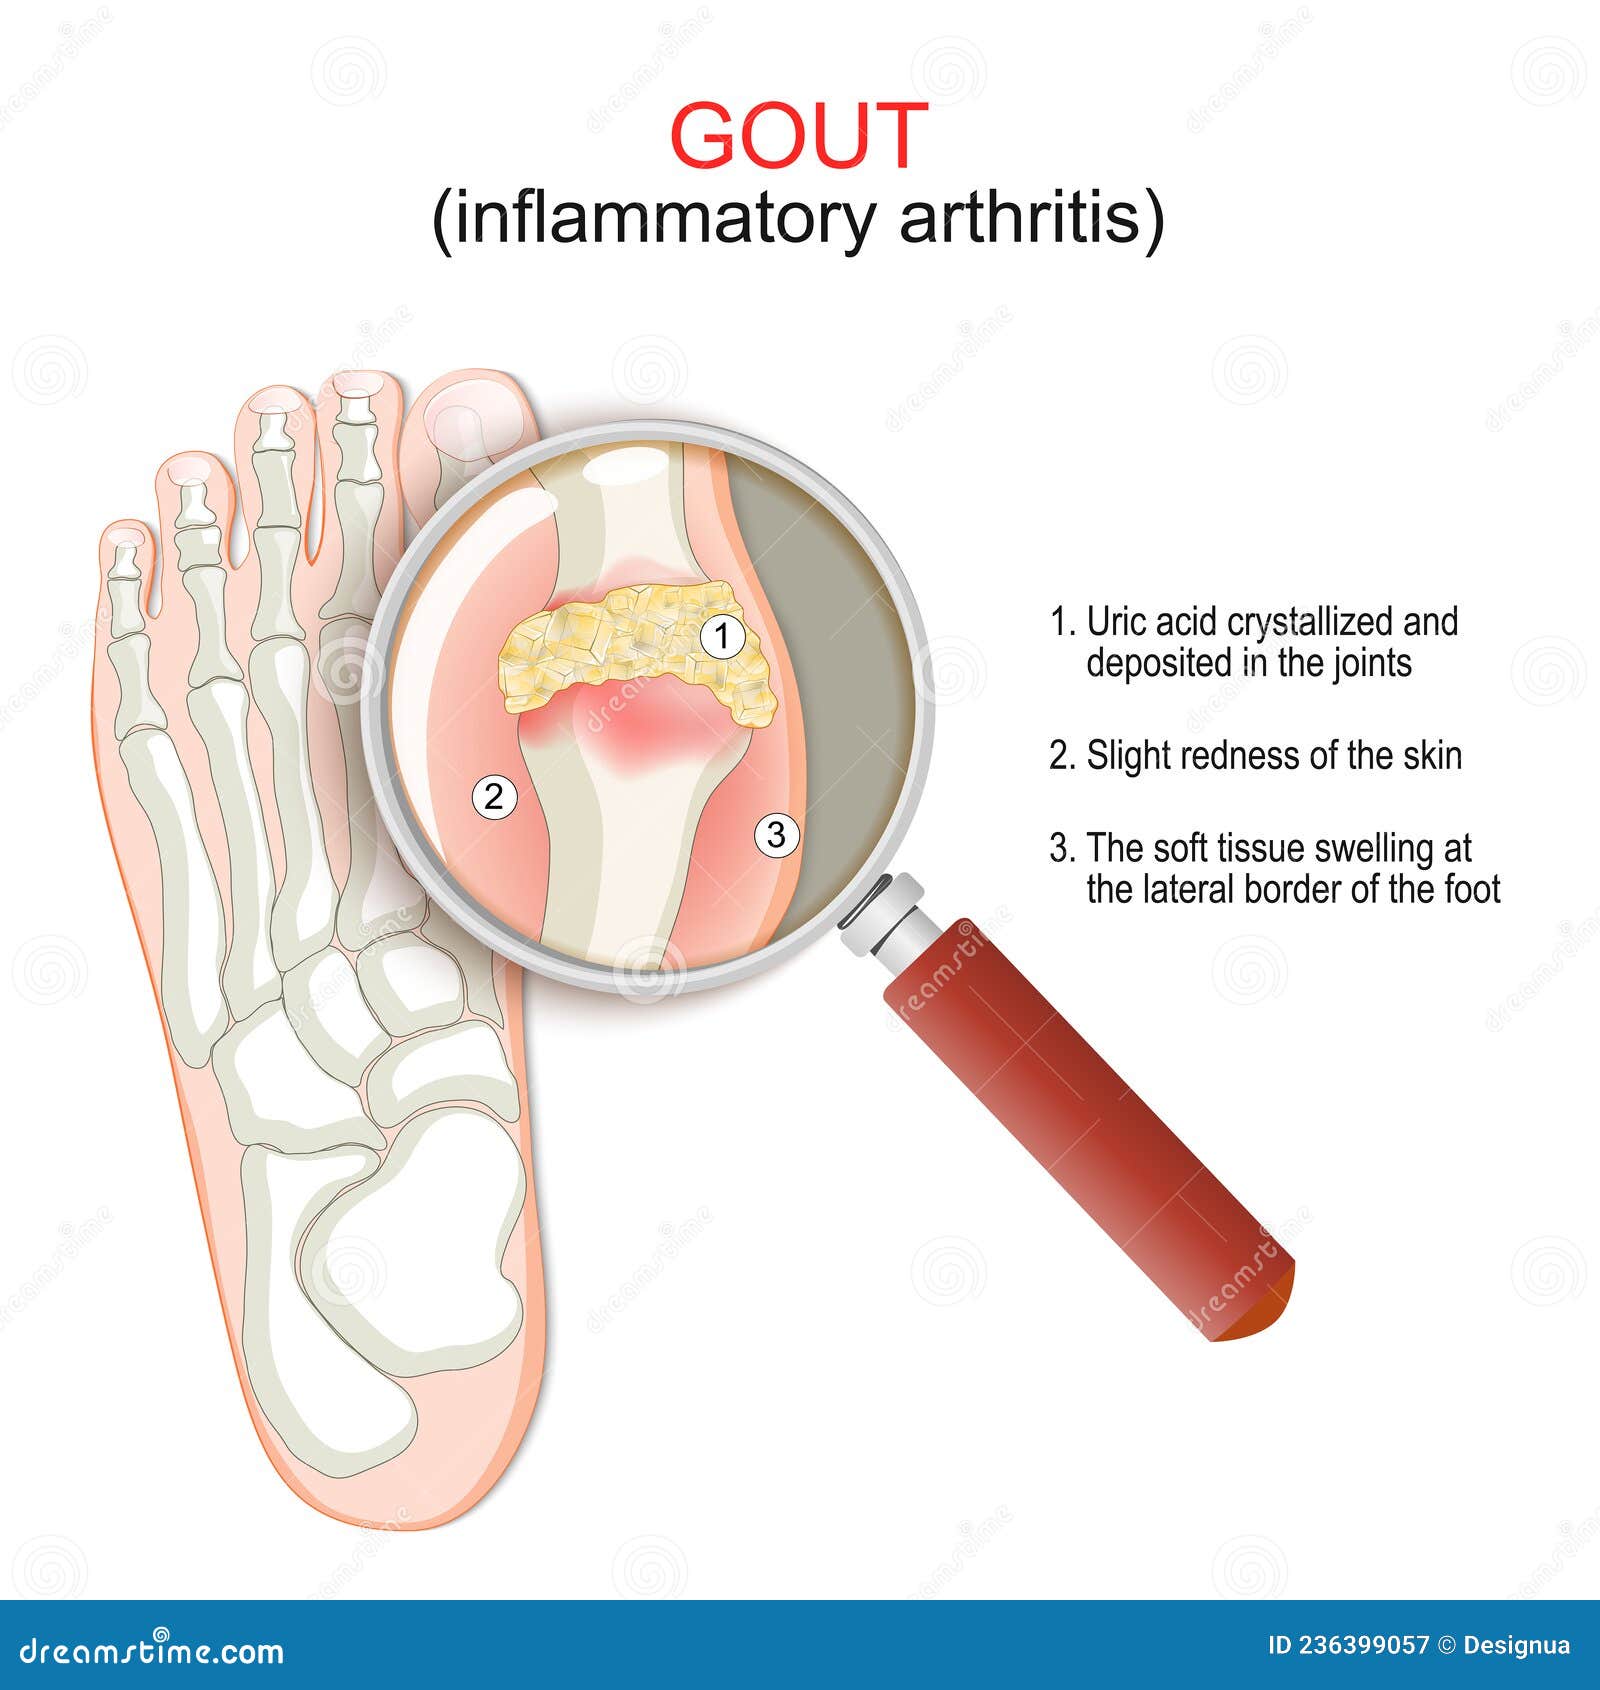 gout. close-up of joint with inflammatory arthritis